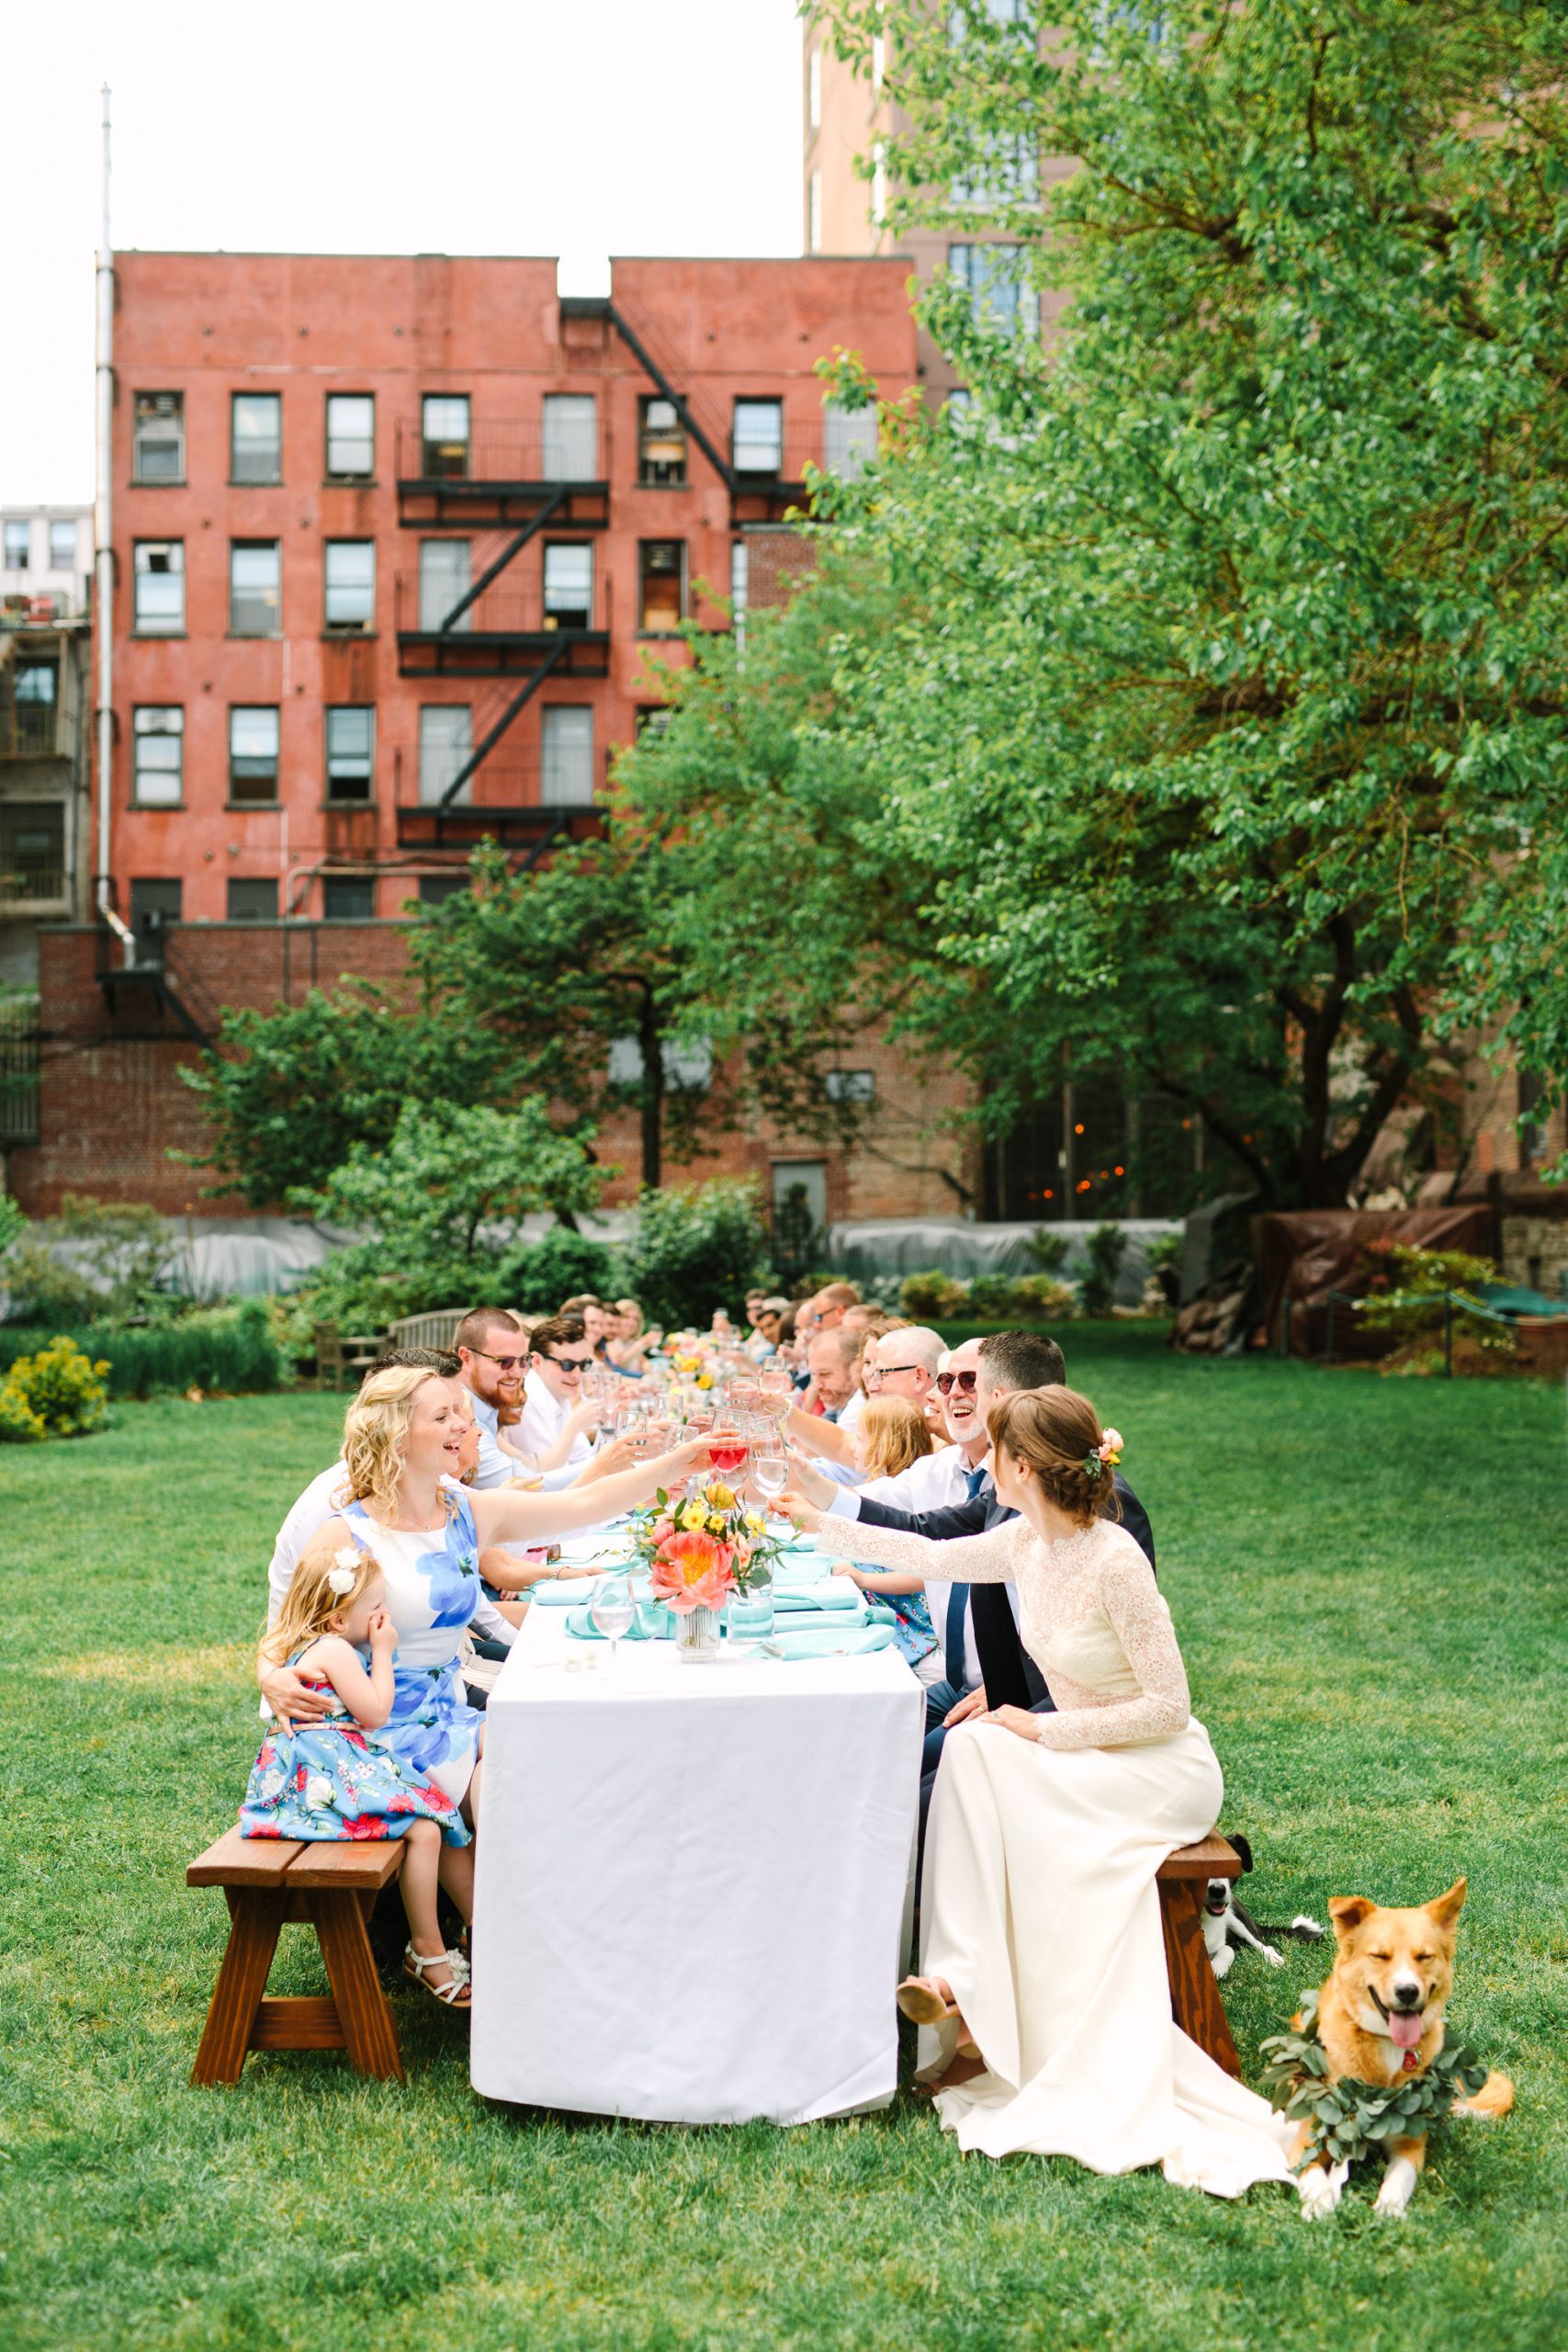 Intimate wedding outdoor dinnerby Mary Costa Photography